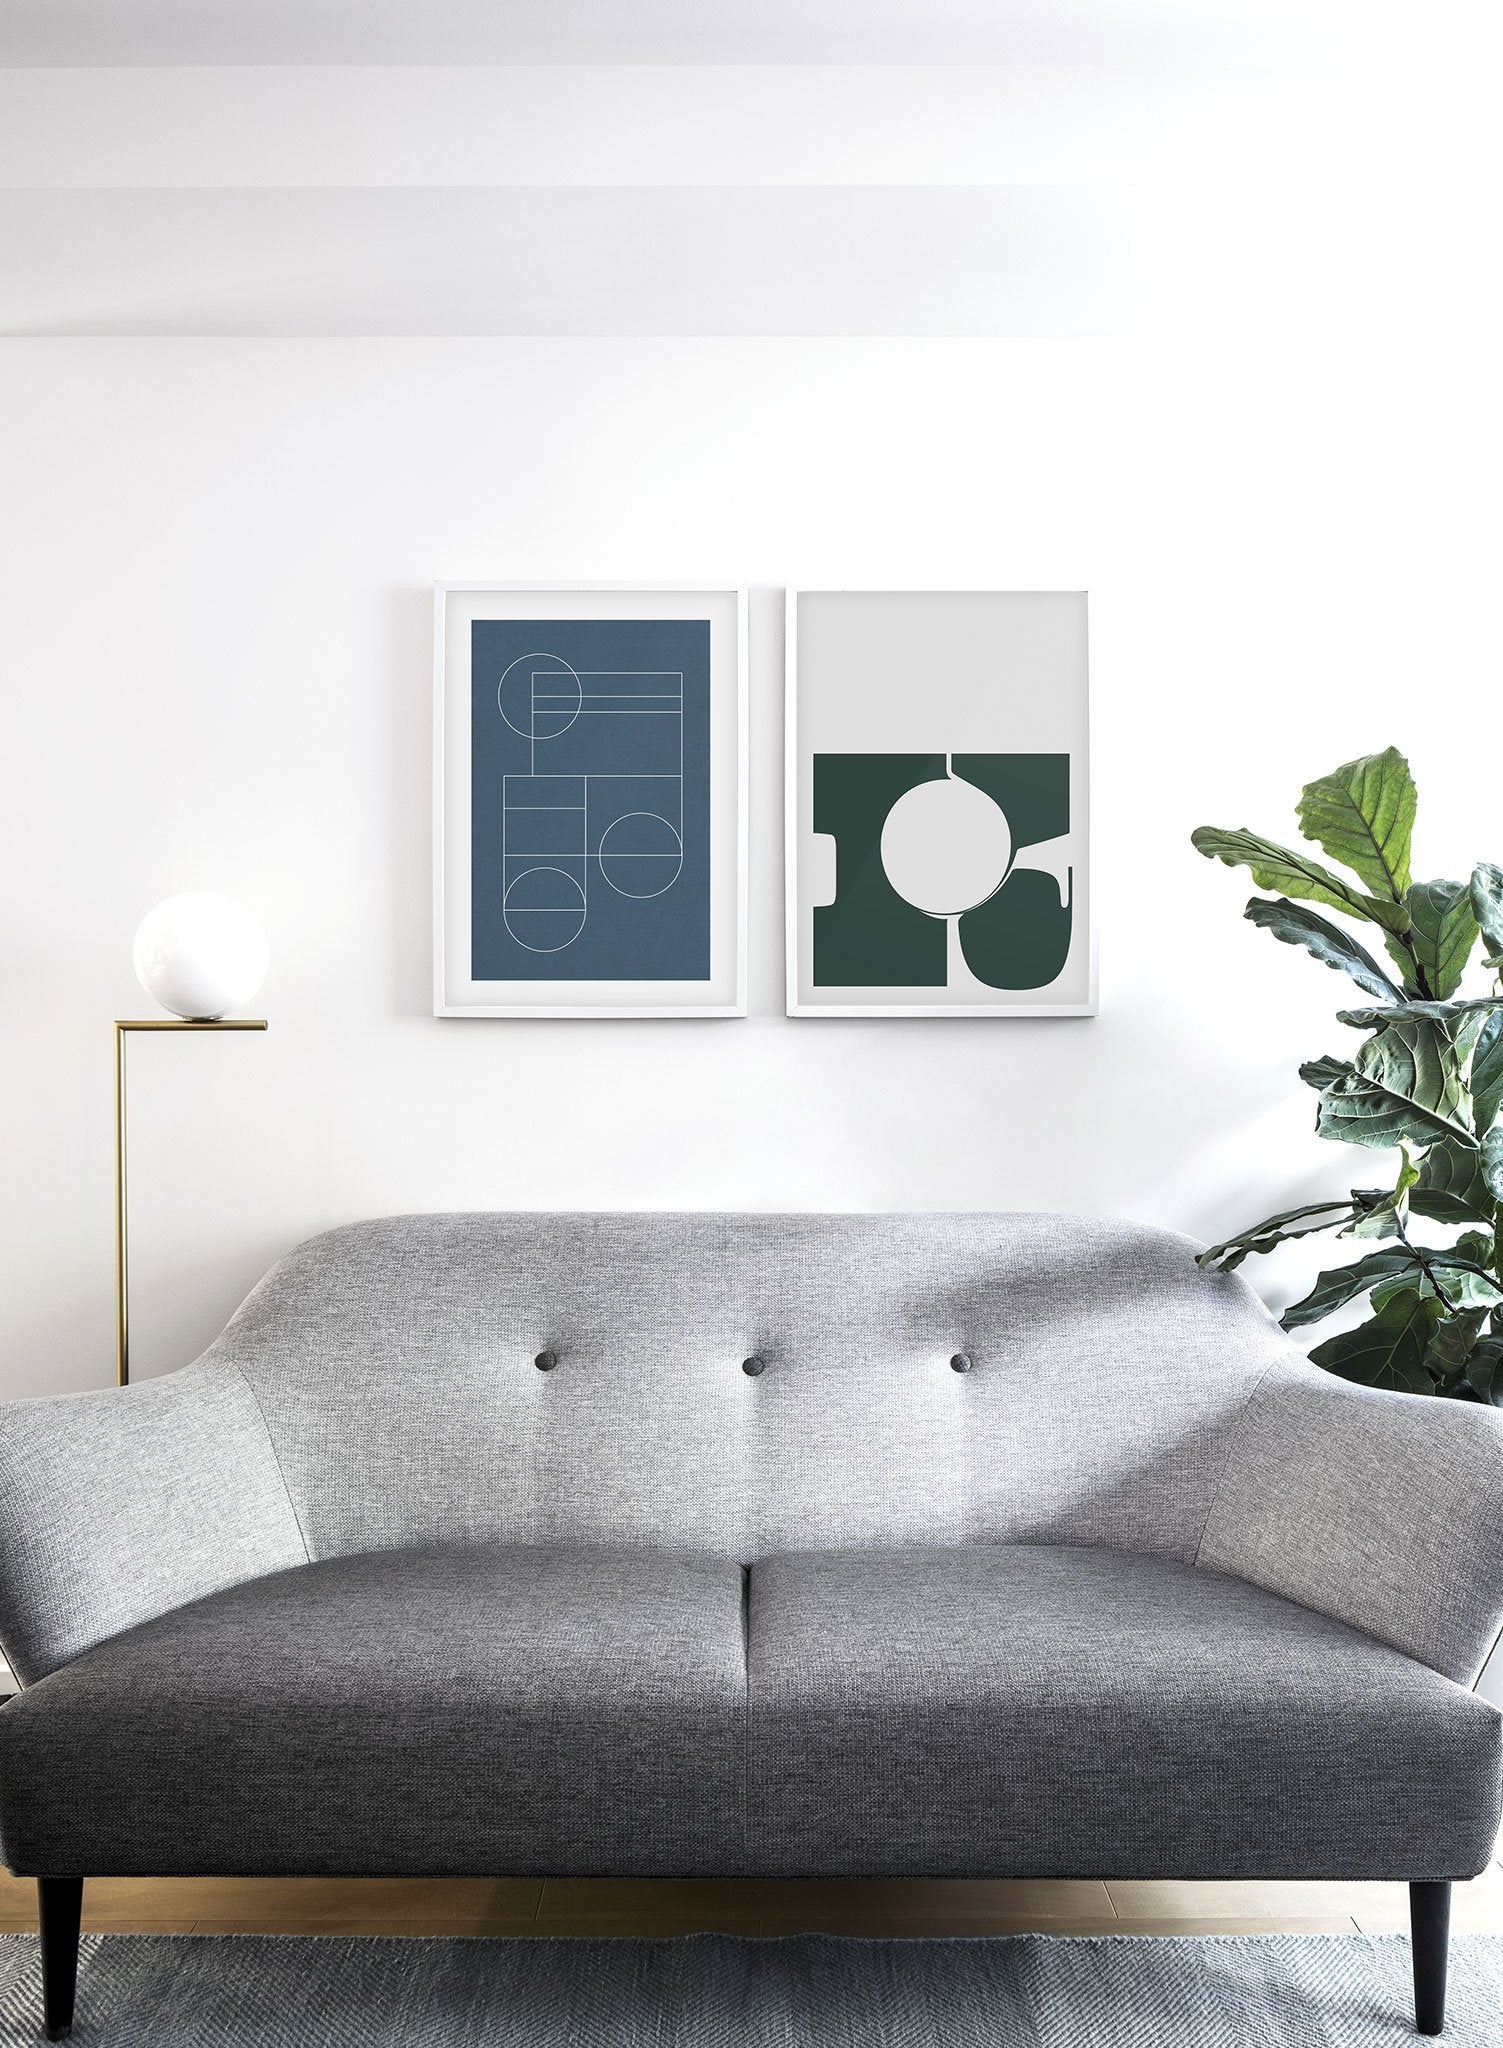 Modern minimalist poster by Opposite Wall with abstract design of Blueprint by Toffie Affichiste - Gallery Wall Duo - Living Room